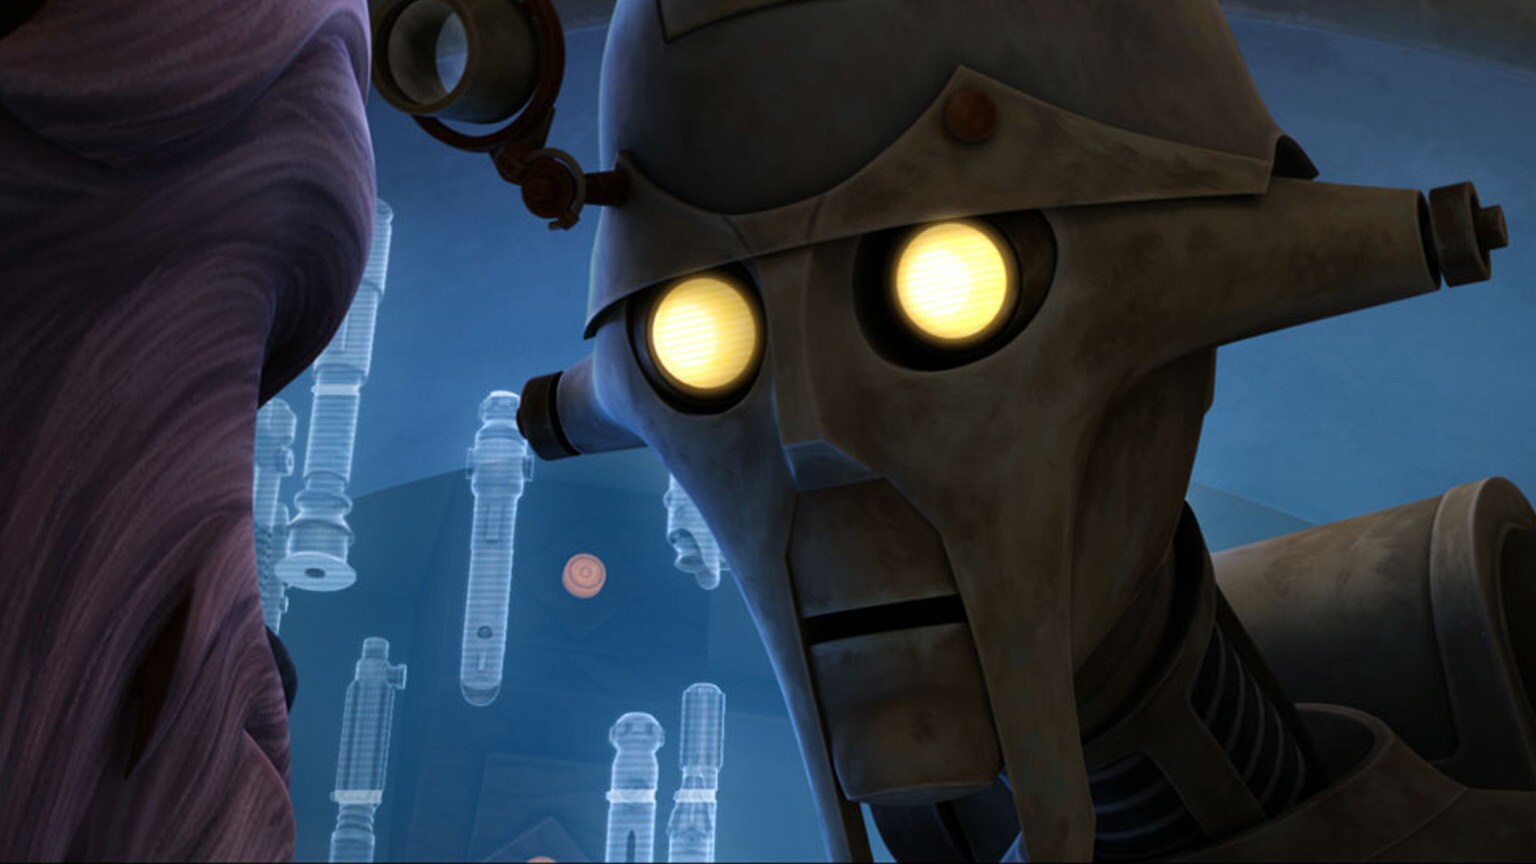 The Clone Wars Rewatch: Courage in "A Test of Strength"